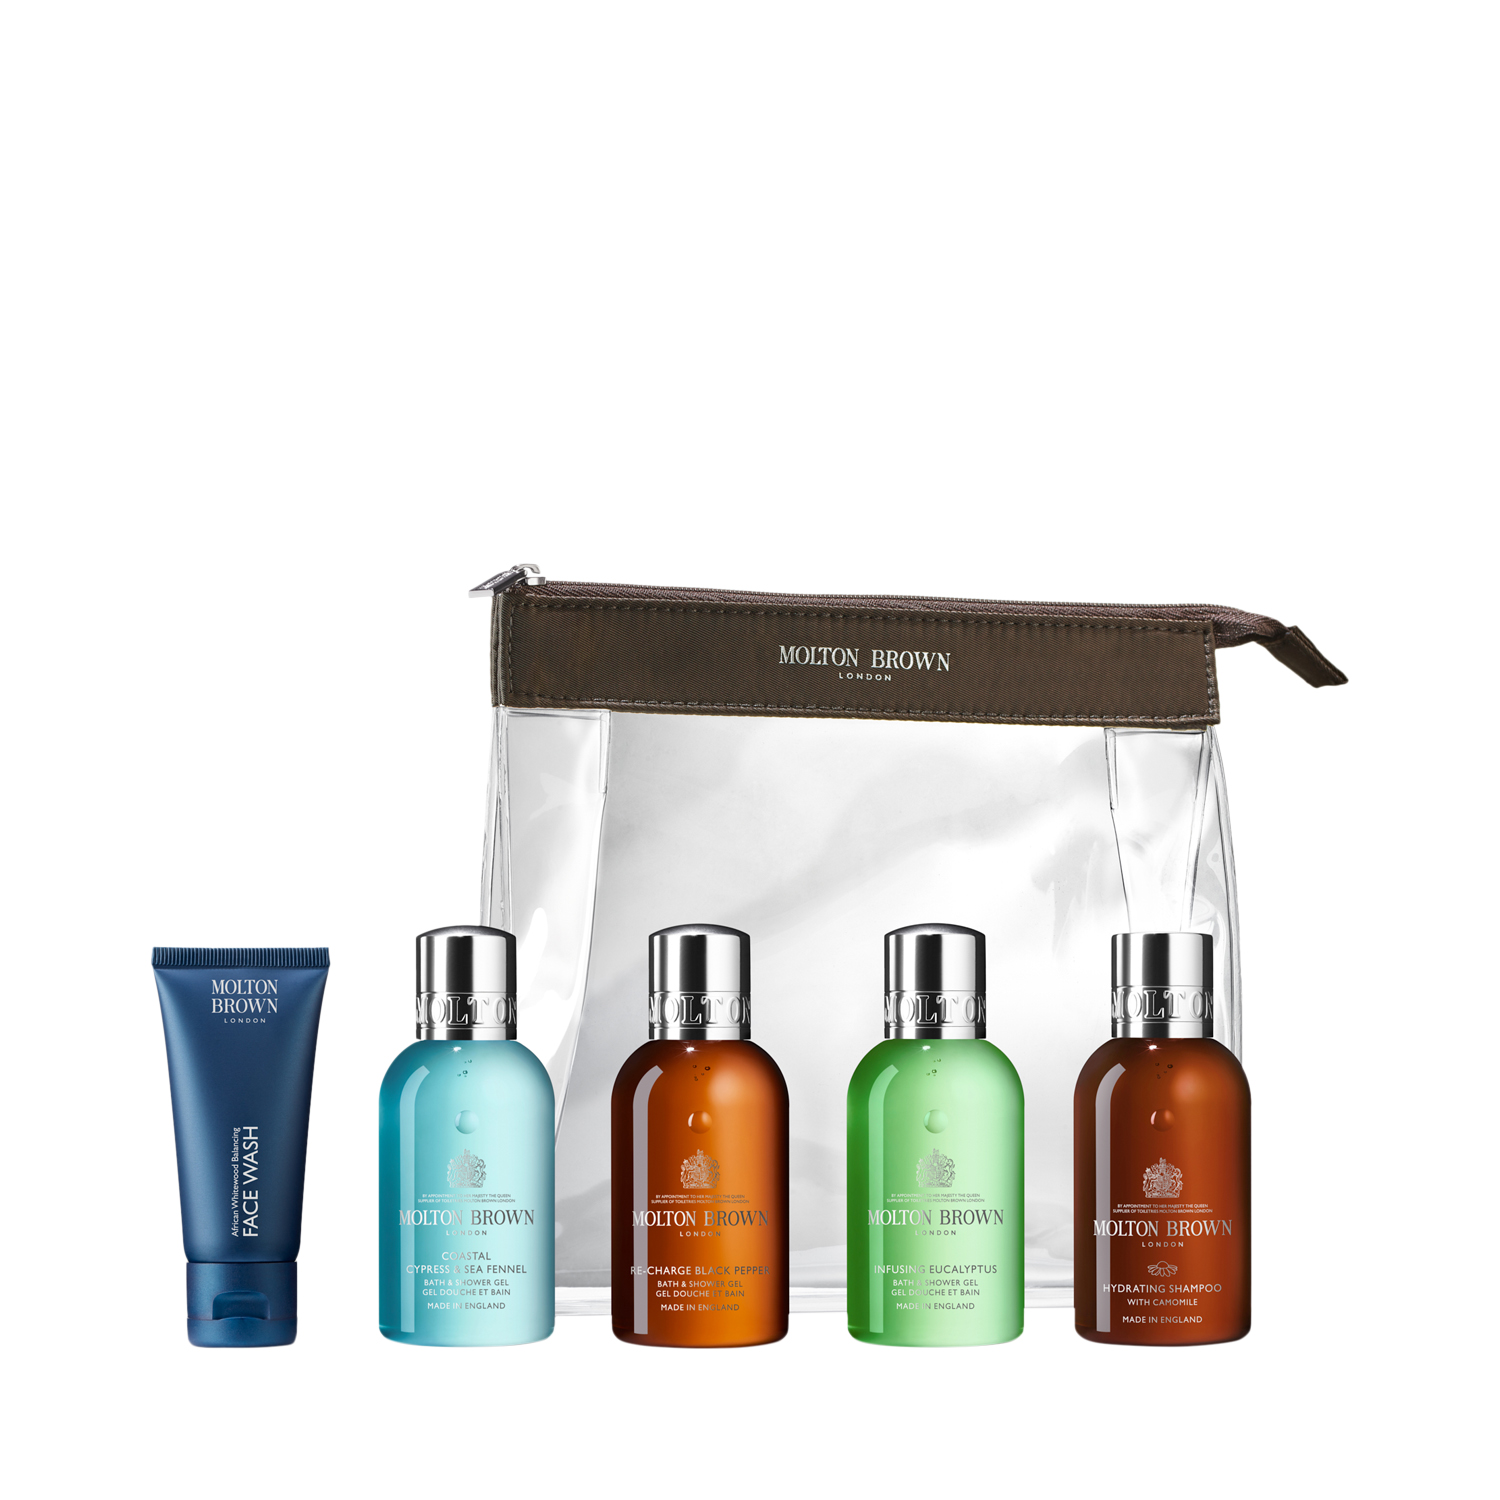 Molton Brown - The Refreshed Adventurer Body & Hair Carry-on Bag